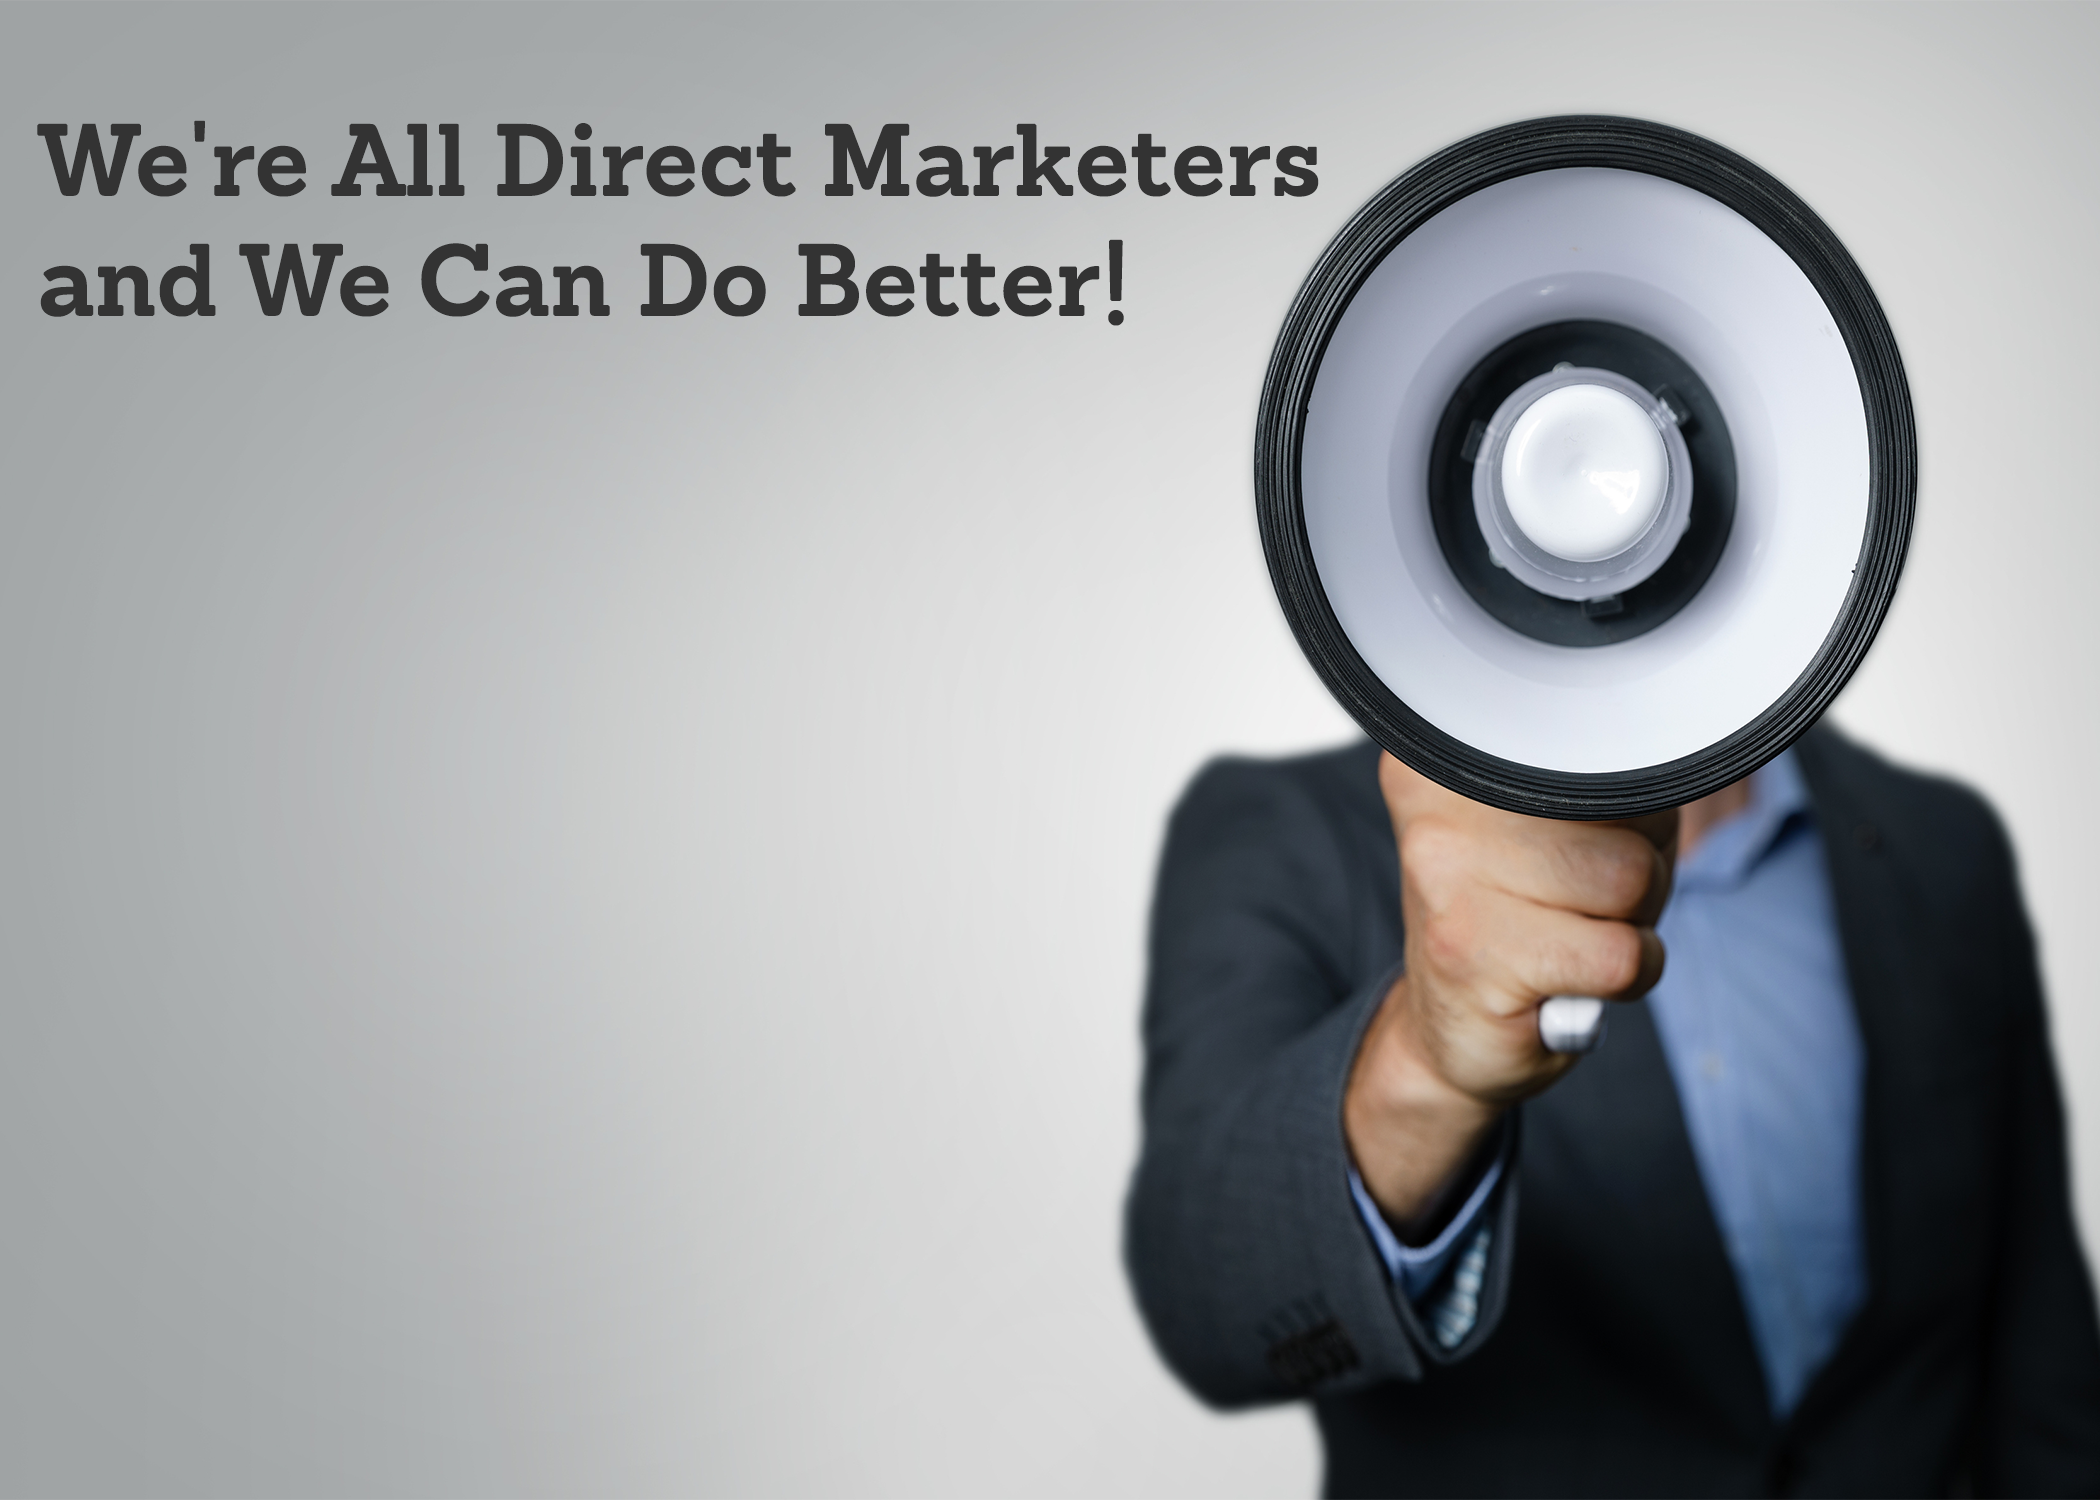 We're All Direct Marketers and We Can Do Better!